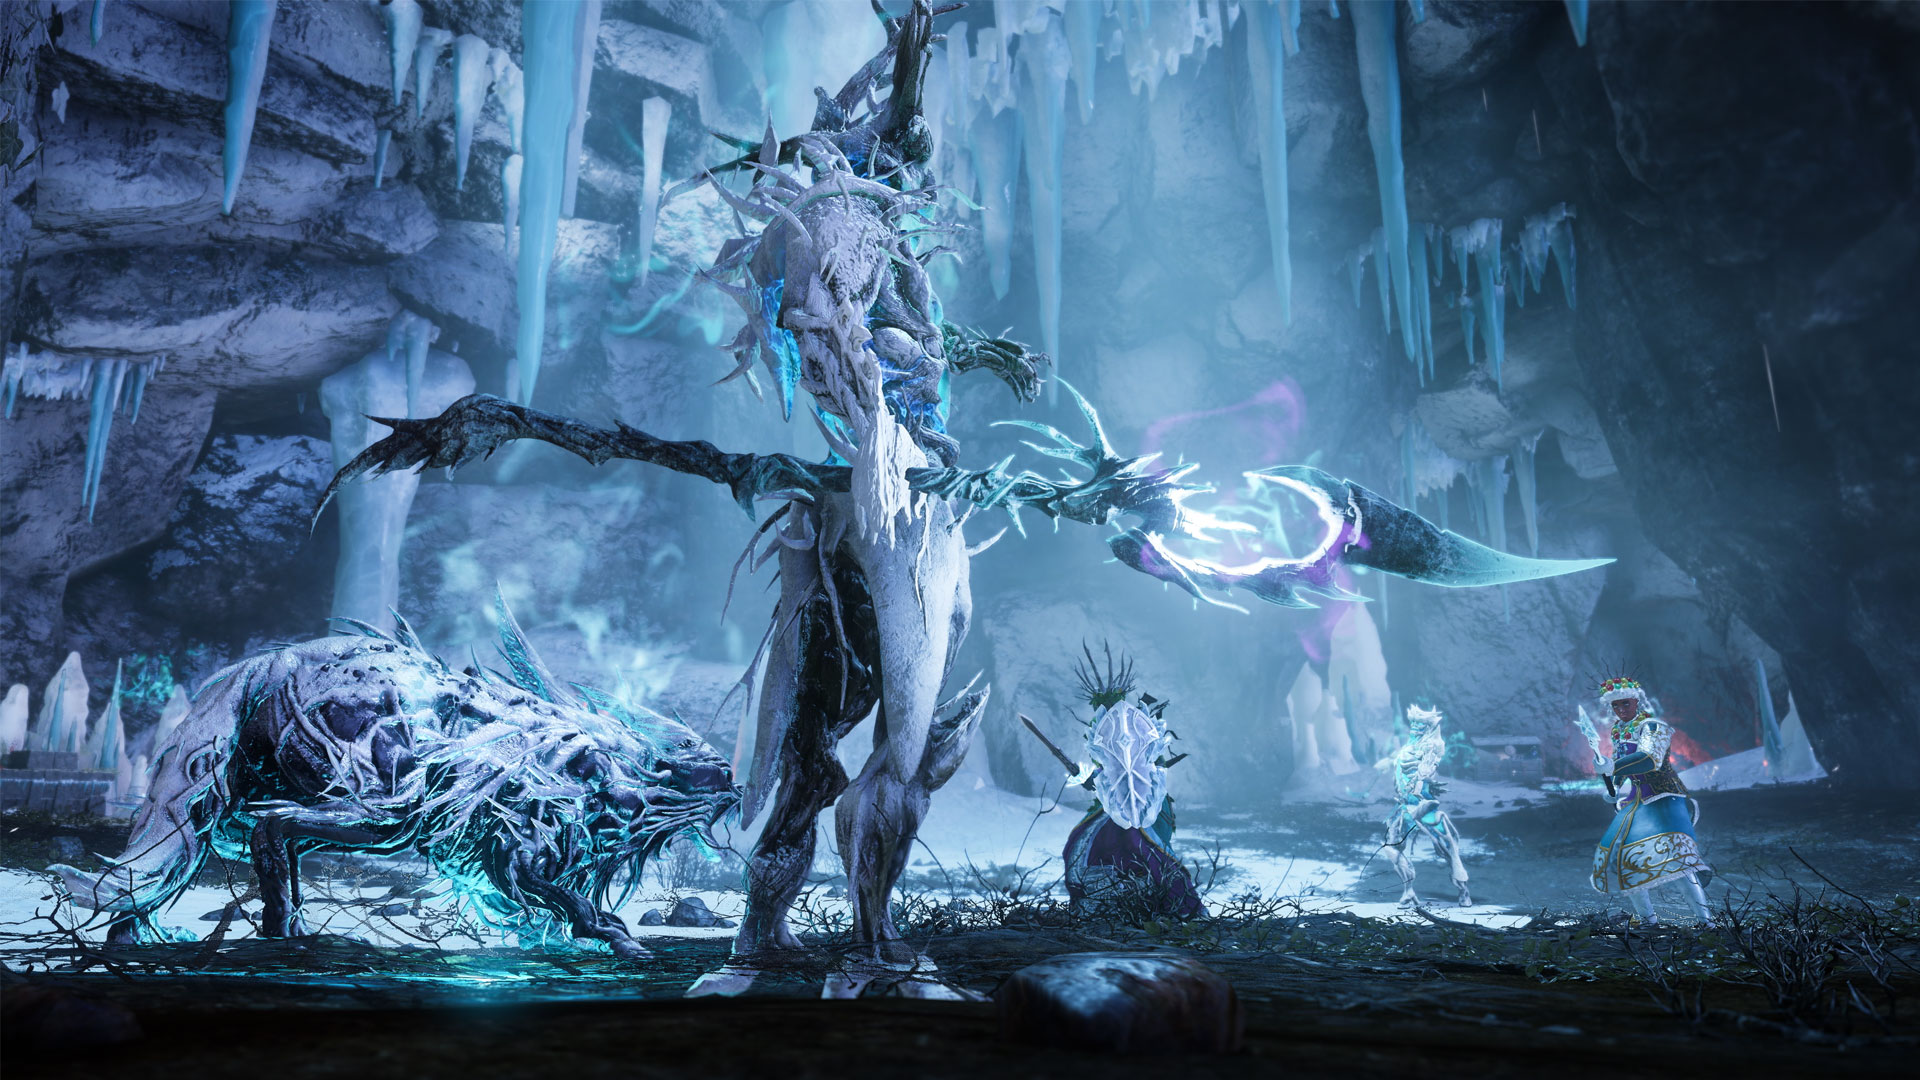 The Icy caves from the Winter Convergence event in New World.